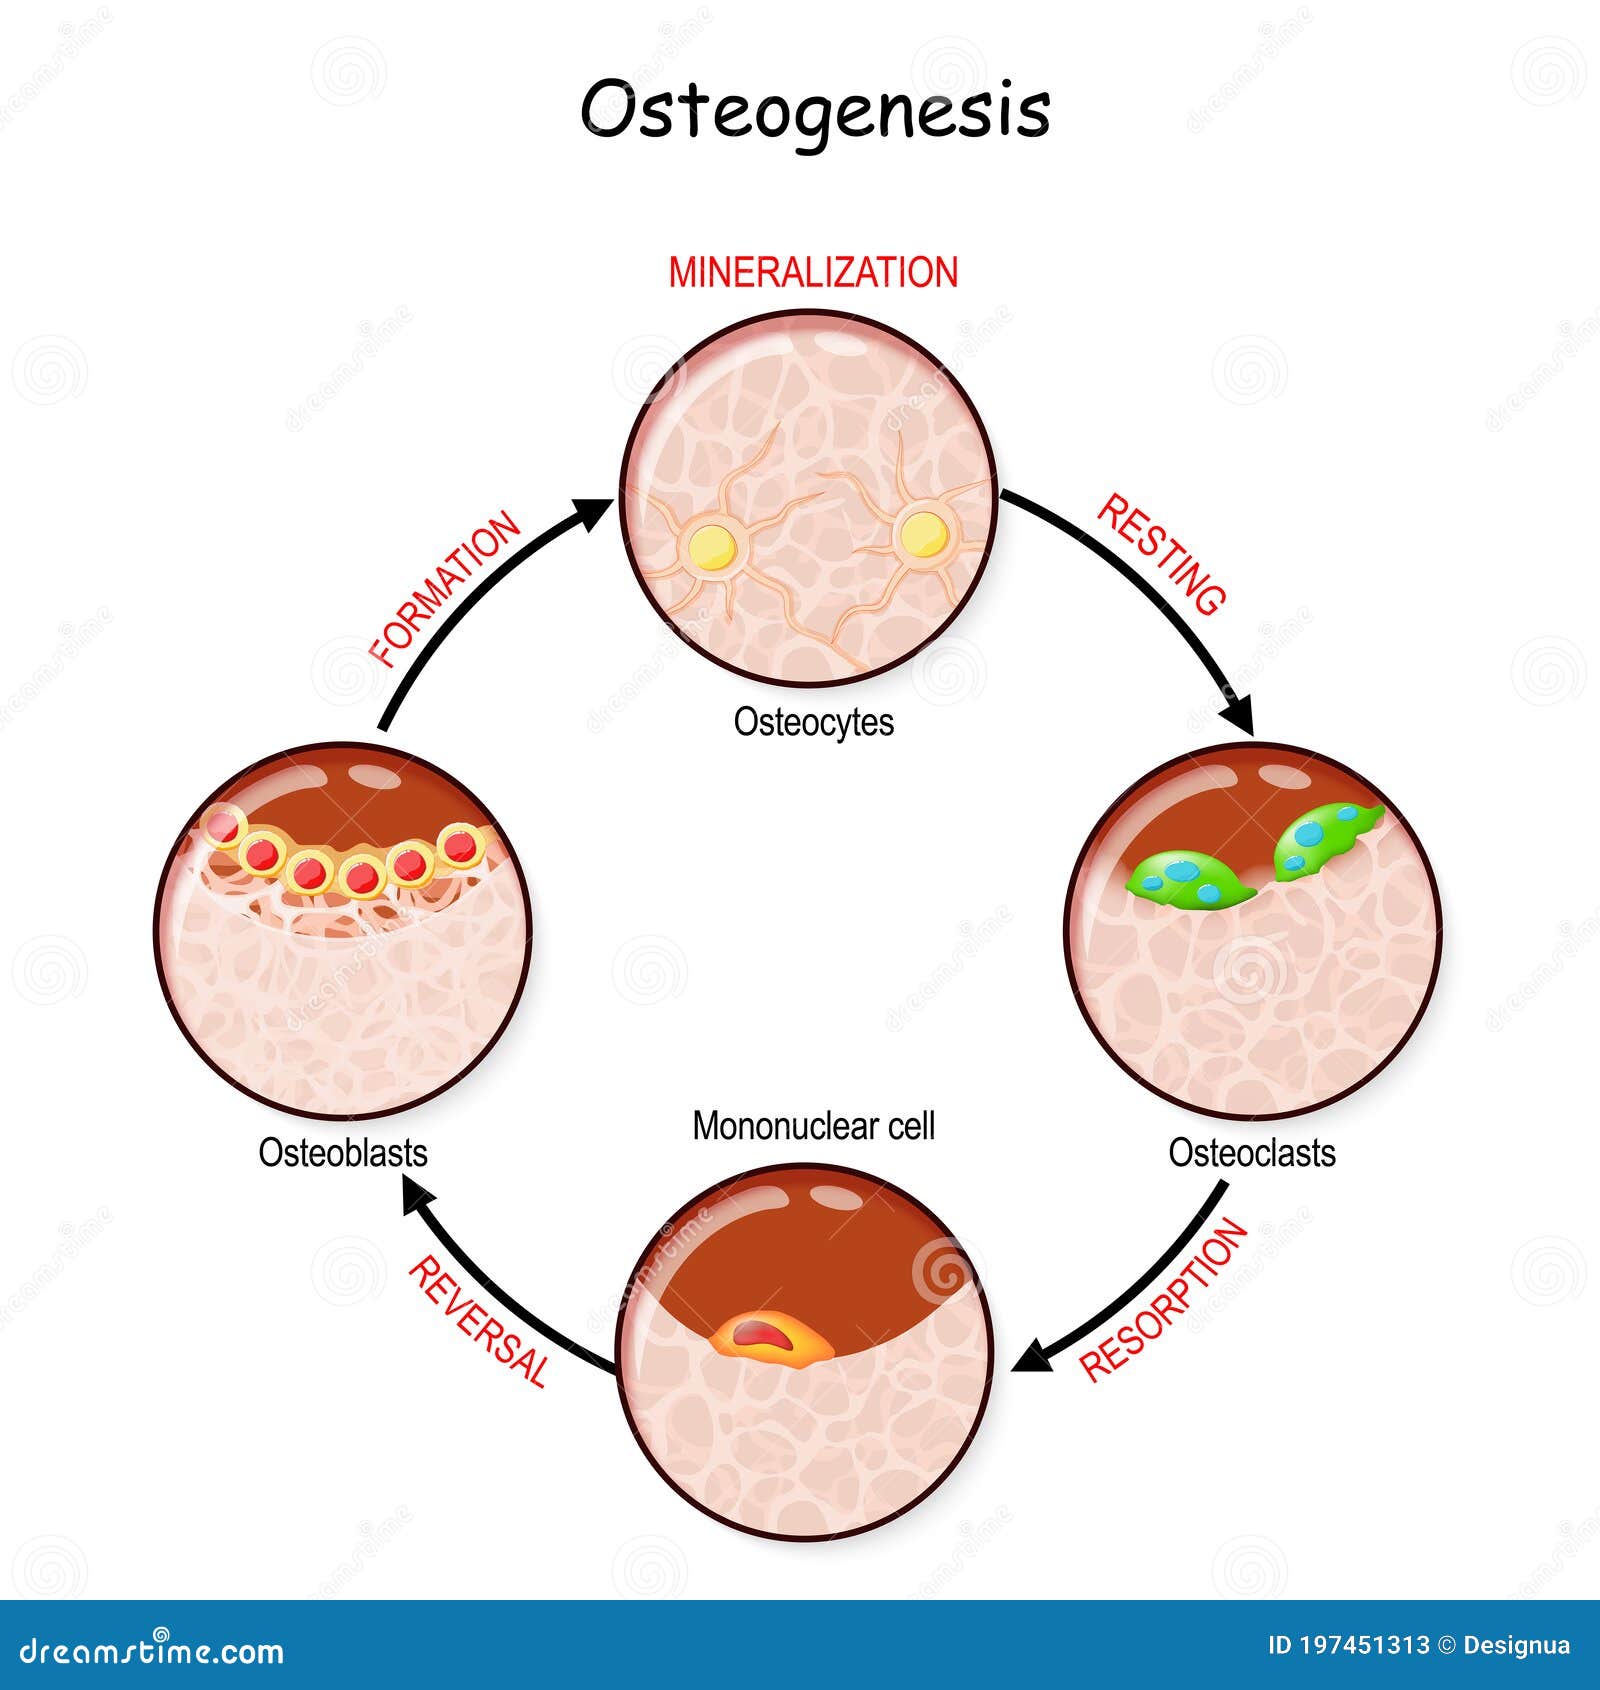 bone remodeling. describe a process of ossification